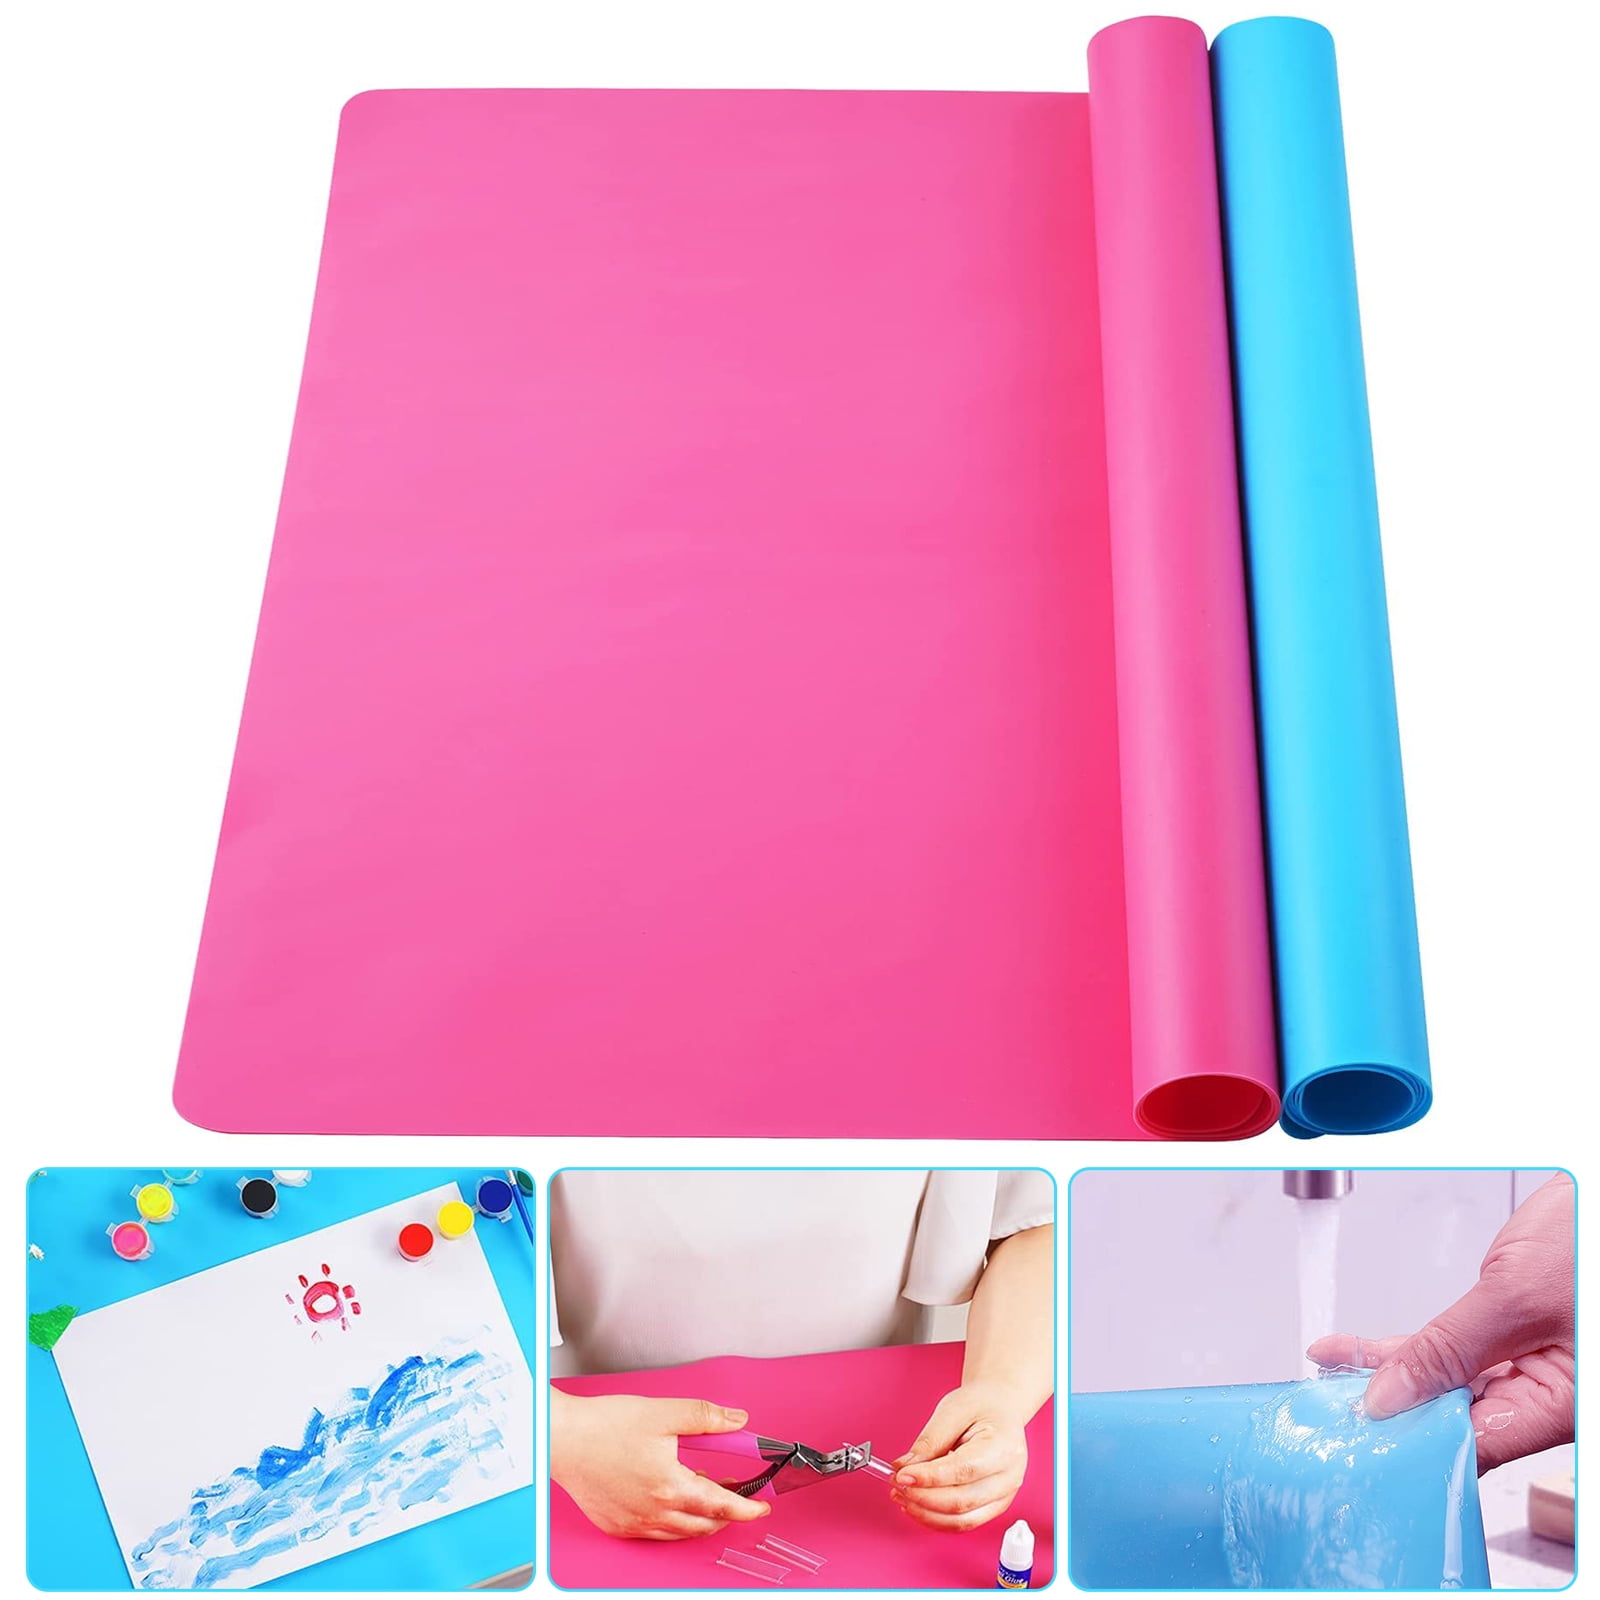 Silicone Mat Crafting